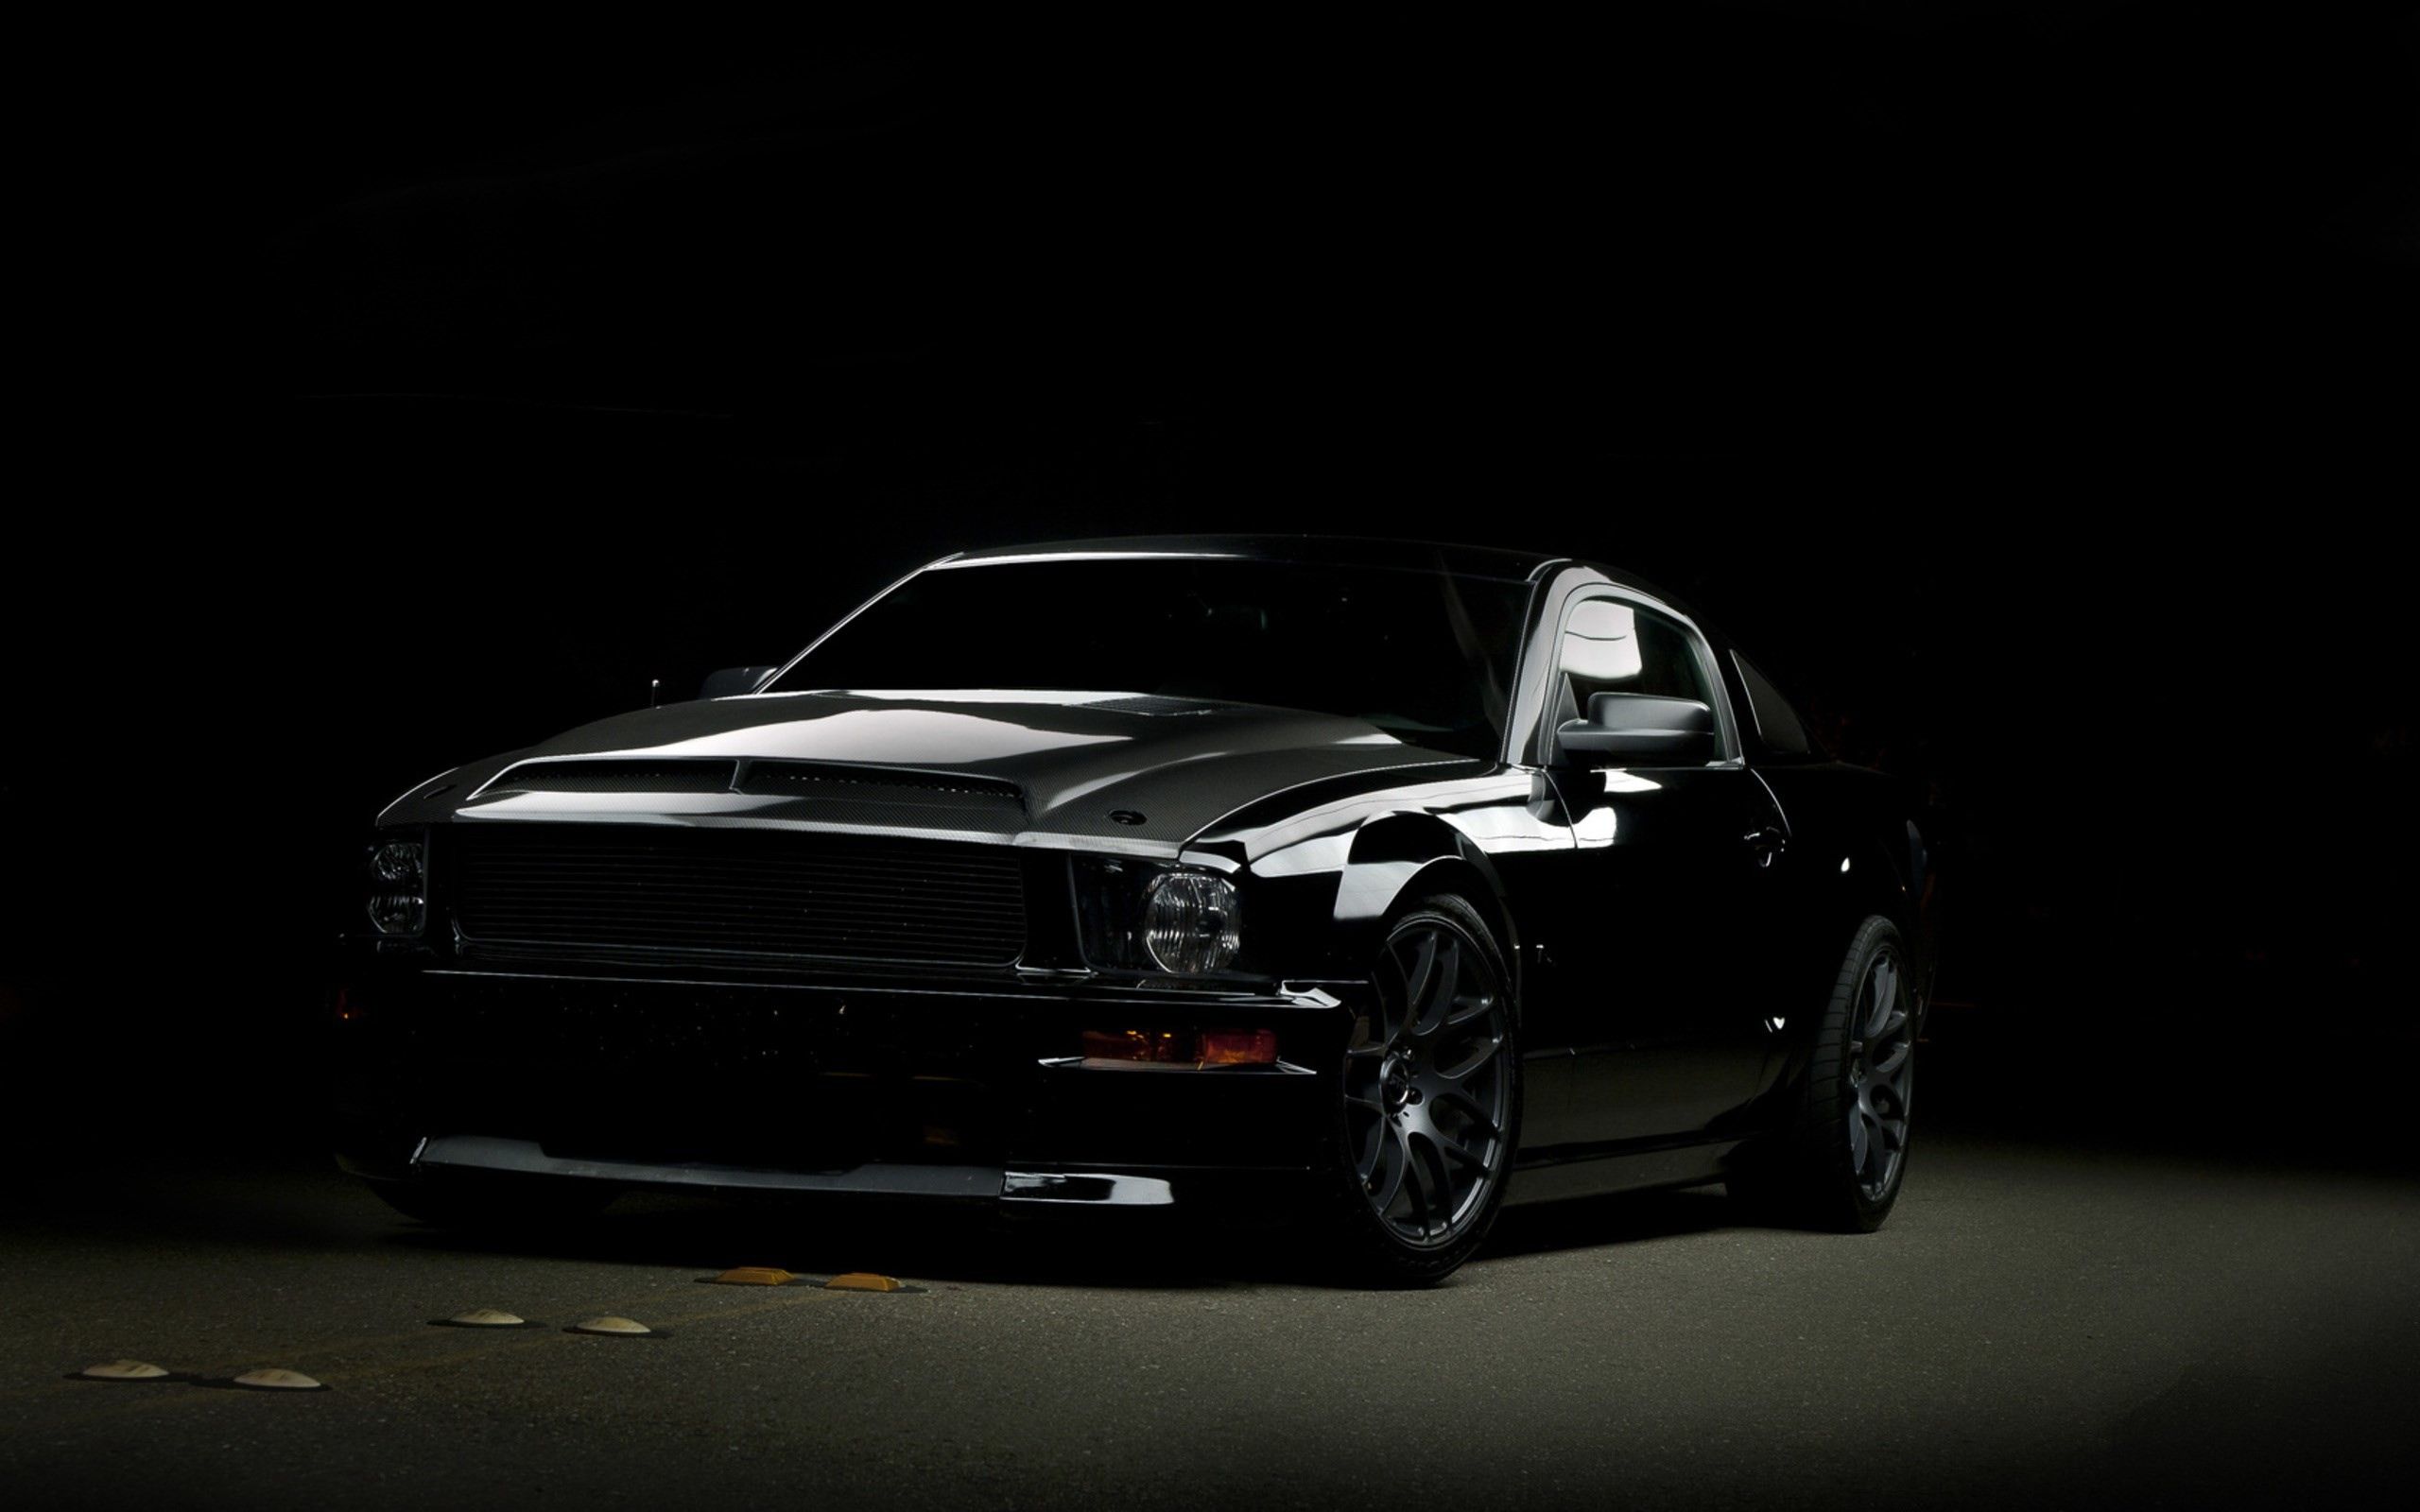 Black Ford Mustang Gt Wallpaper Image. Ford mustang gt, Ford mustang wallpaper, Ford mustang